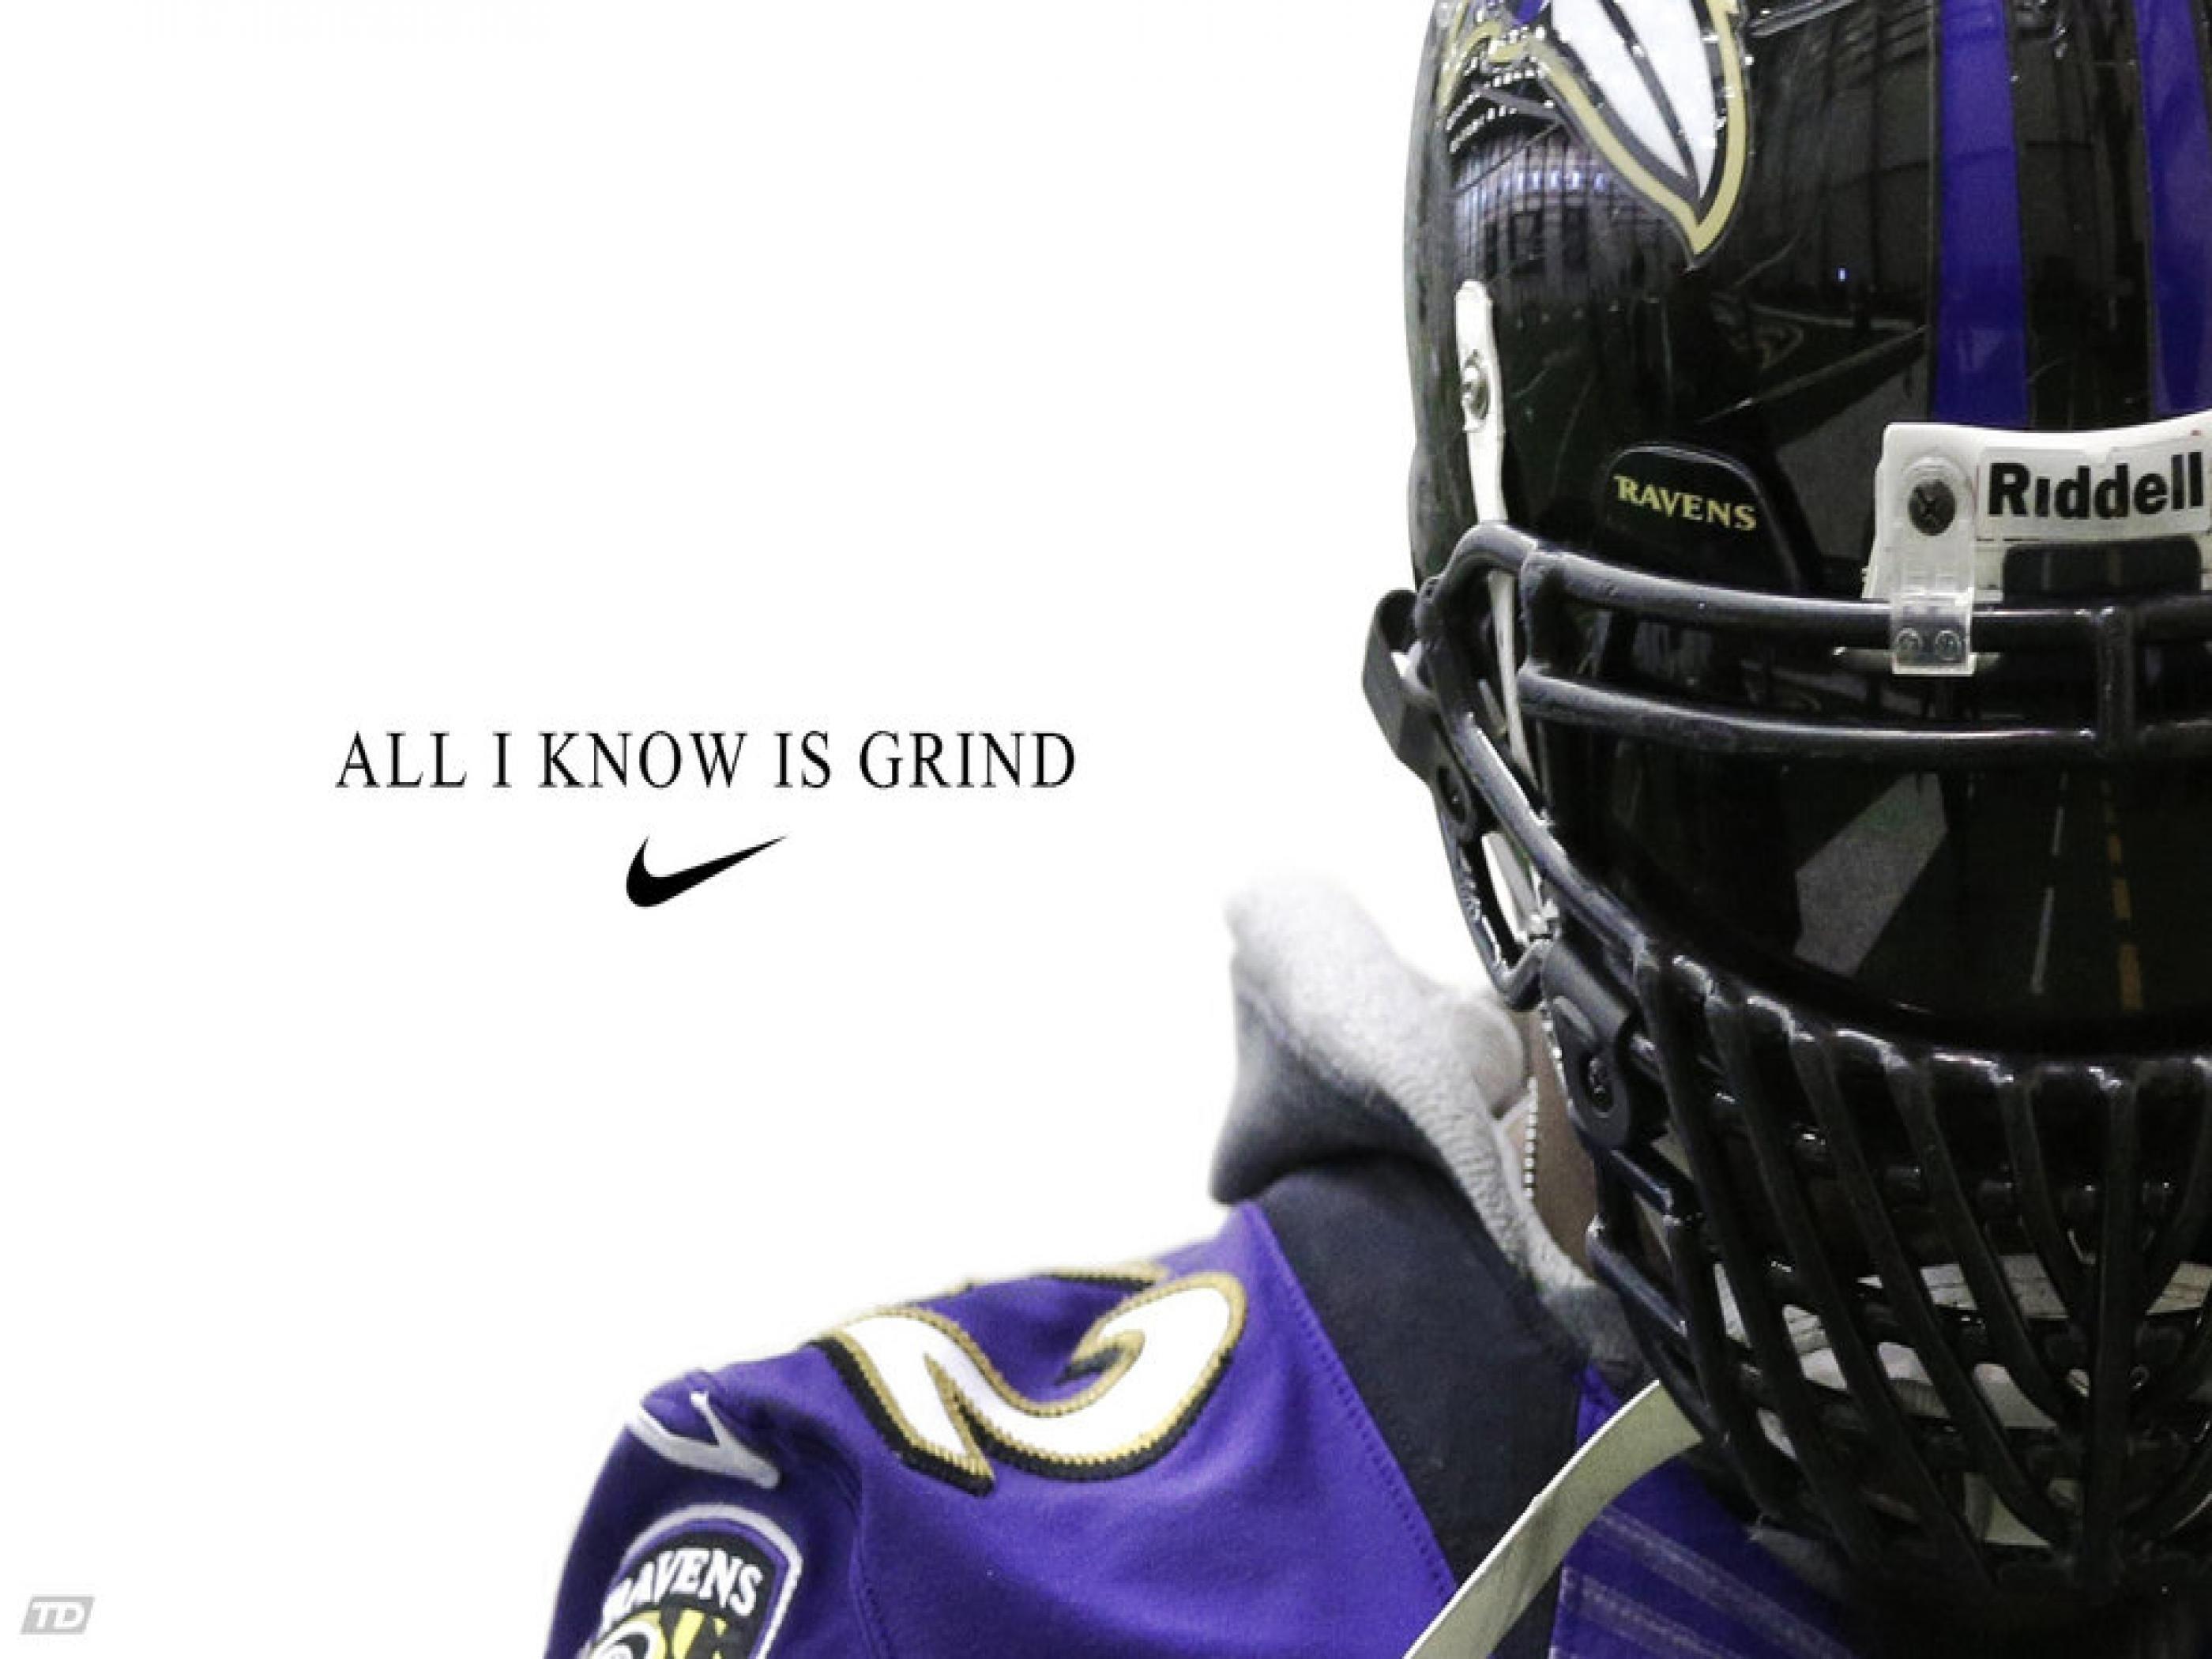 Download Ray Lewis Football Quotes Wallpaper